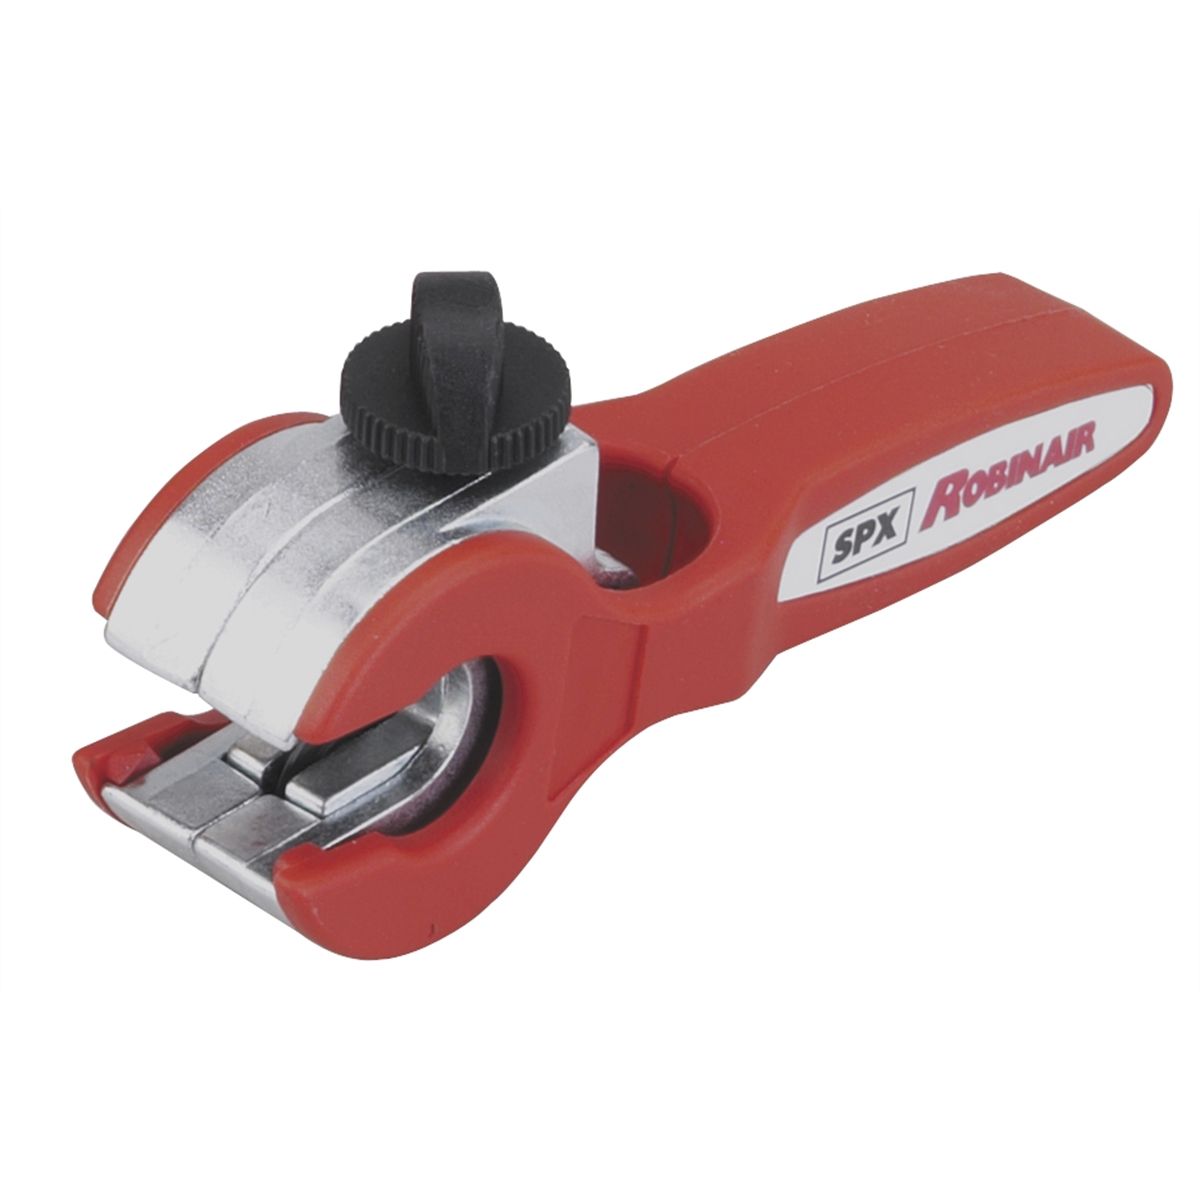 Ratcheting Tubing Cutter 3-13mm, 1/8 to 1/2 In Capacity